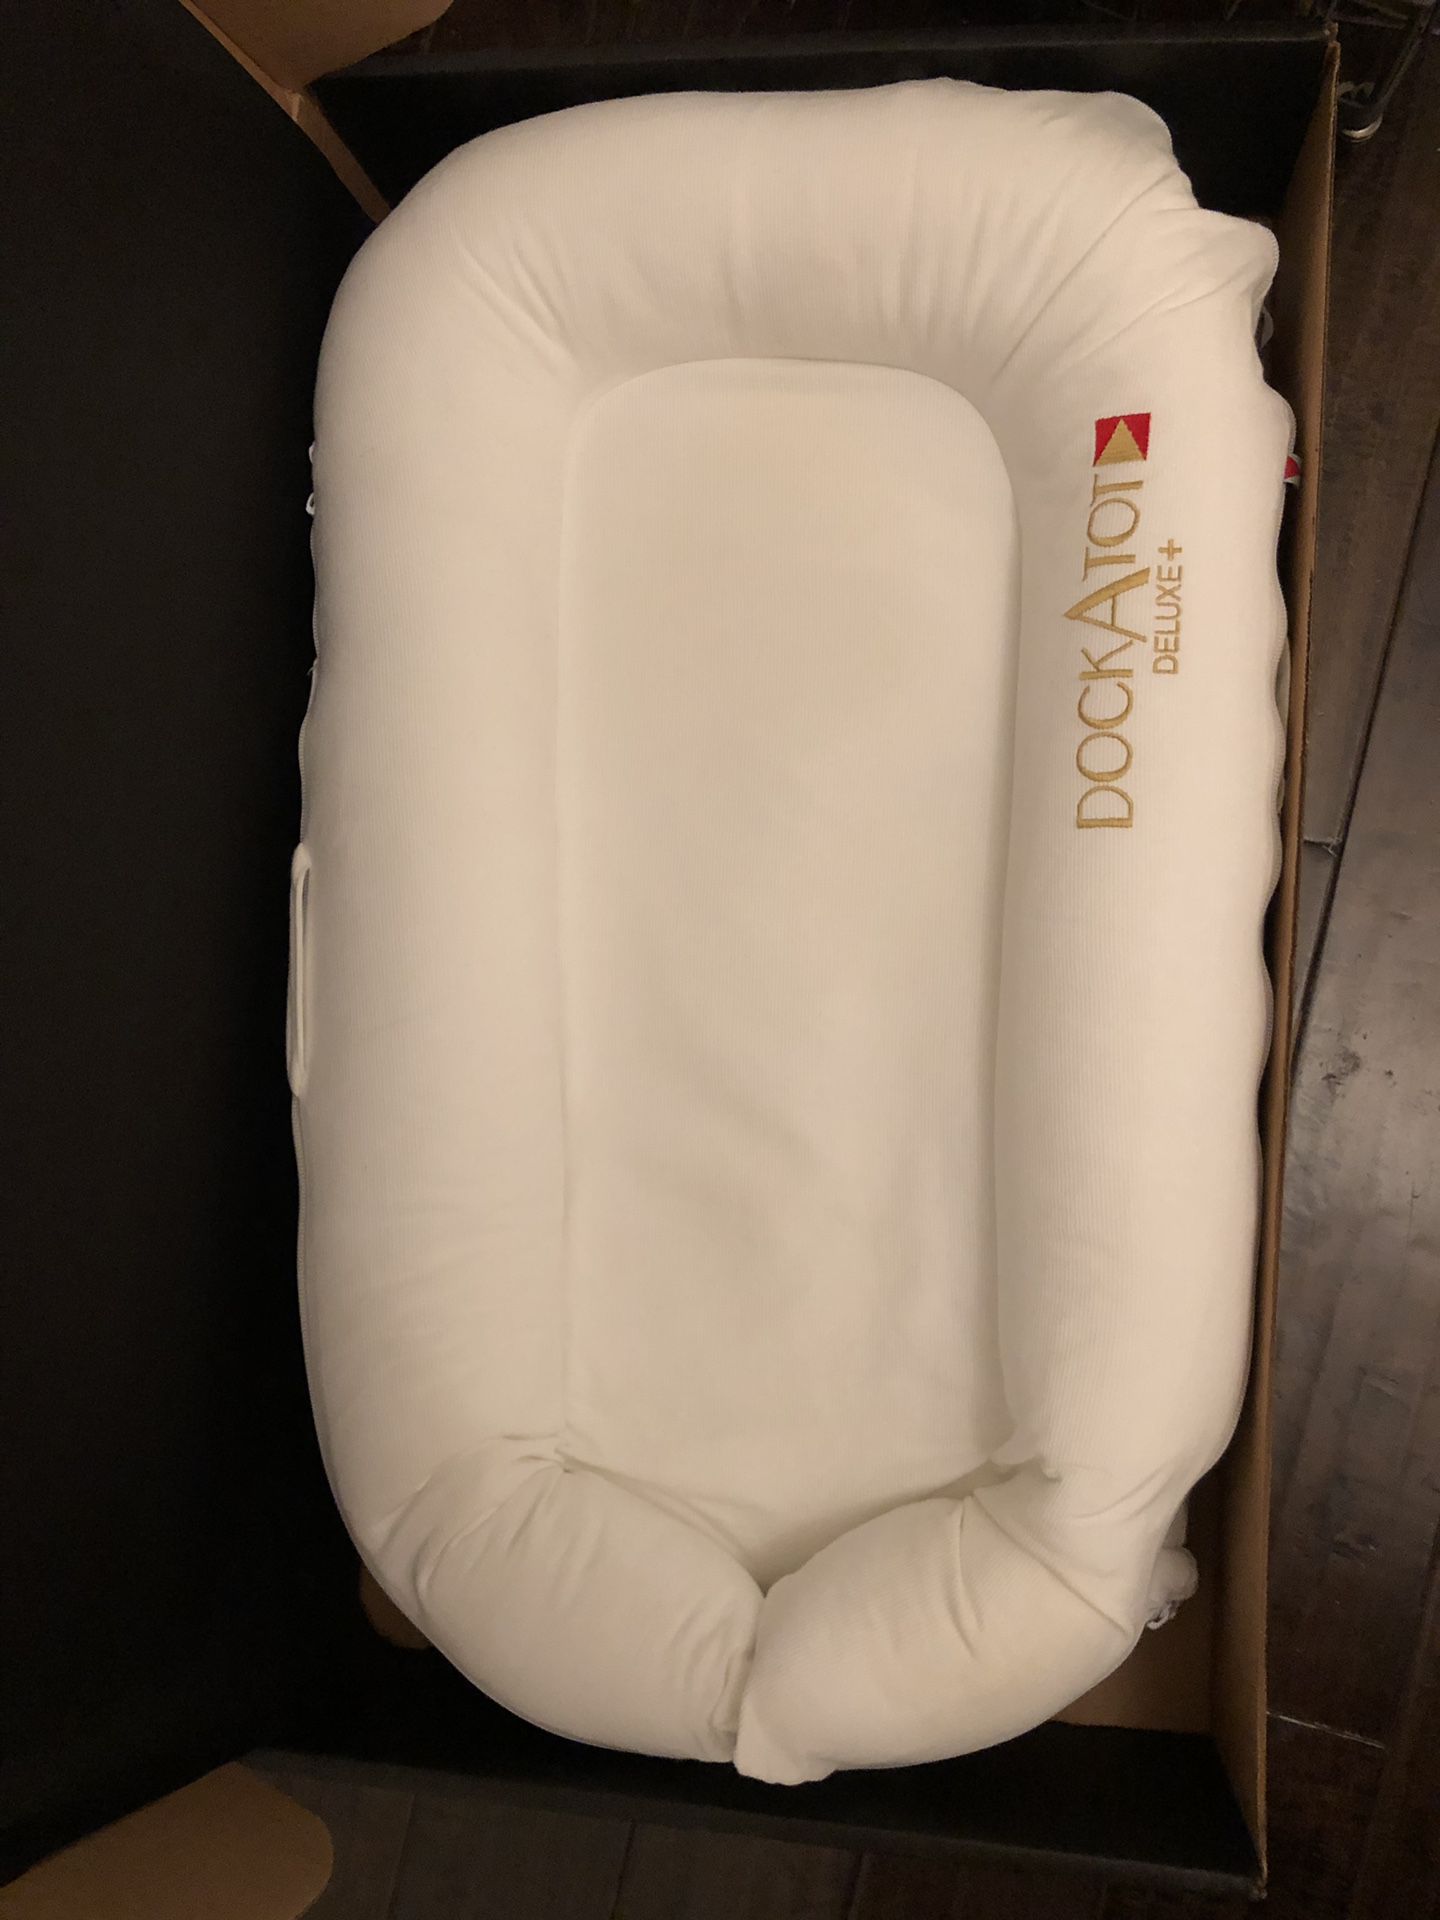 DockATot Deluxe in Pristine White with toy arch- Like New!